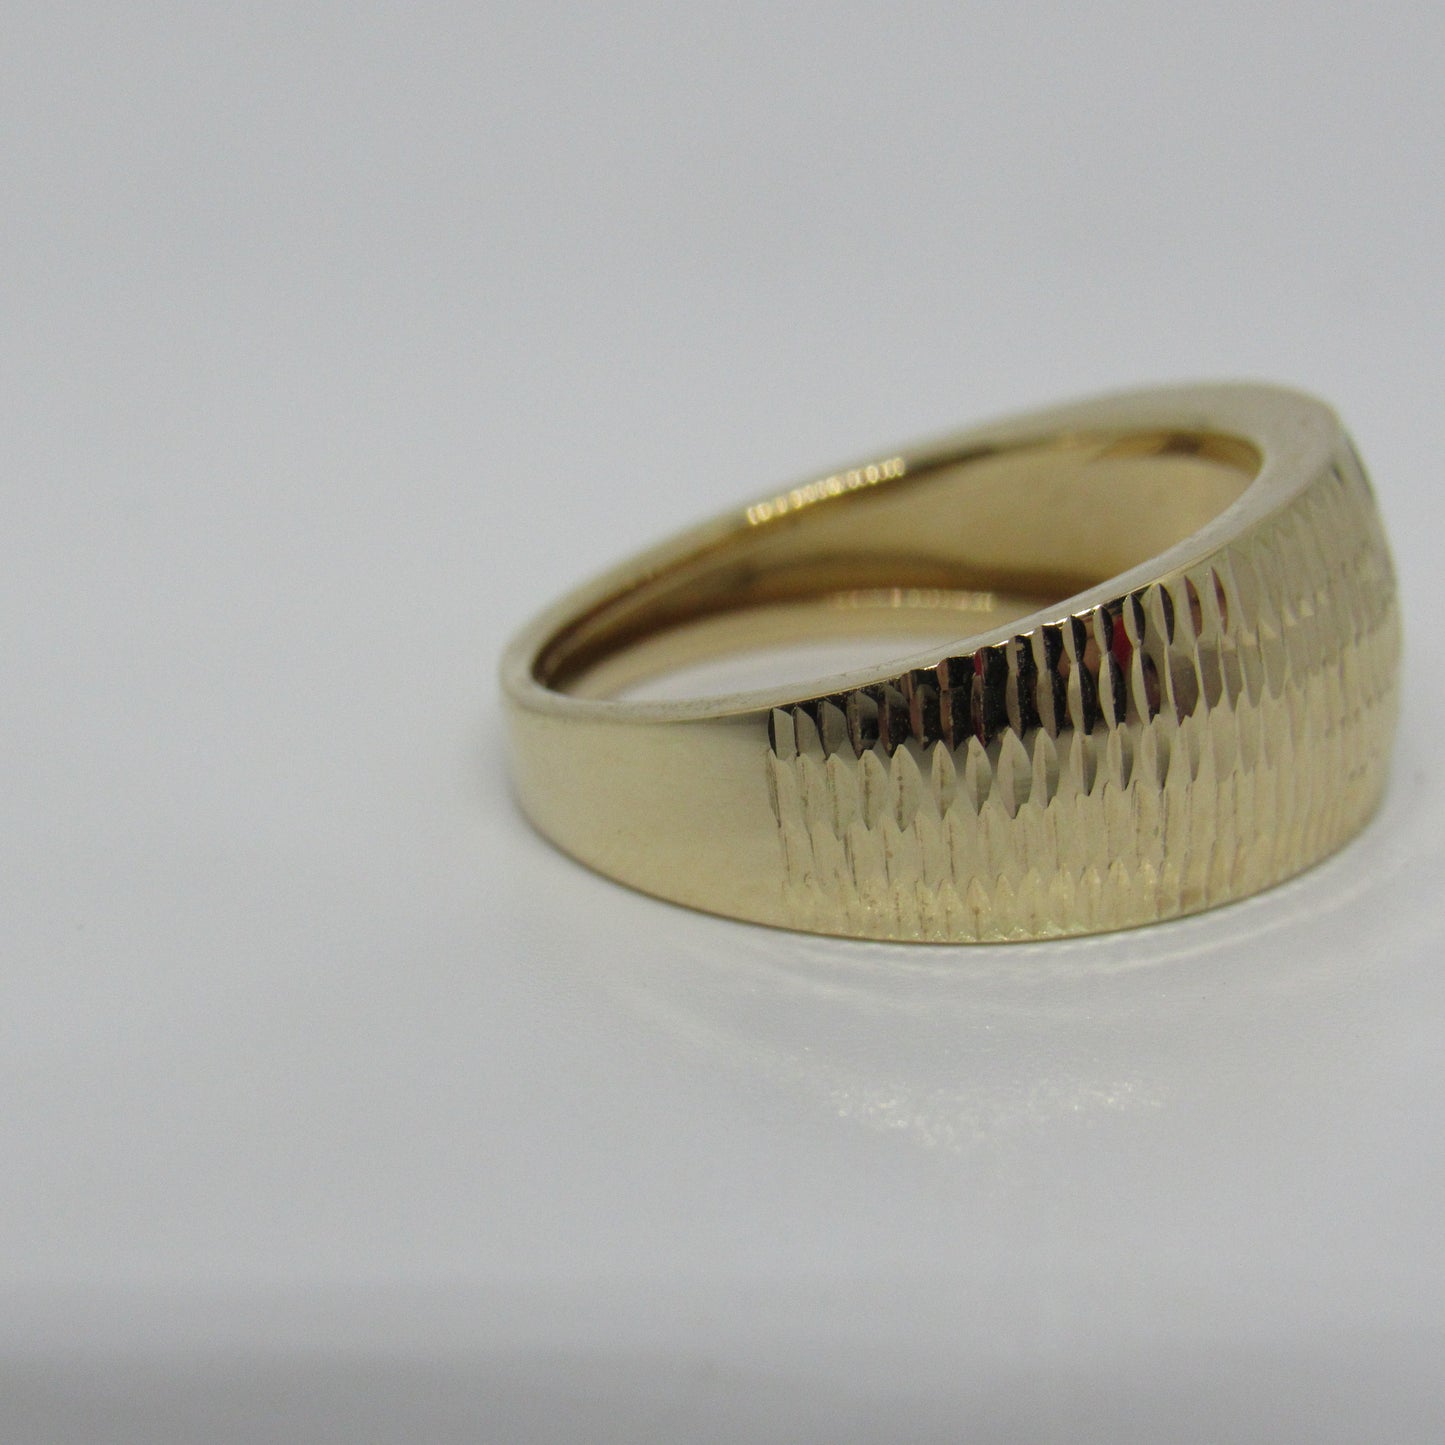 14k Yellow Gold Italy EG Ring Band Domed Etched Lines - Size 9.5